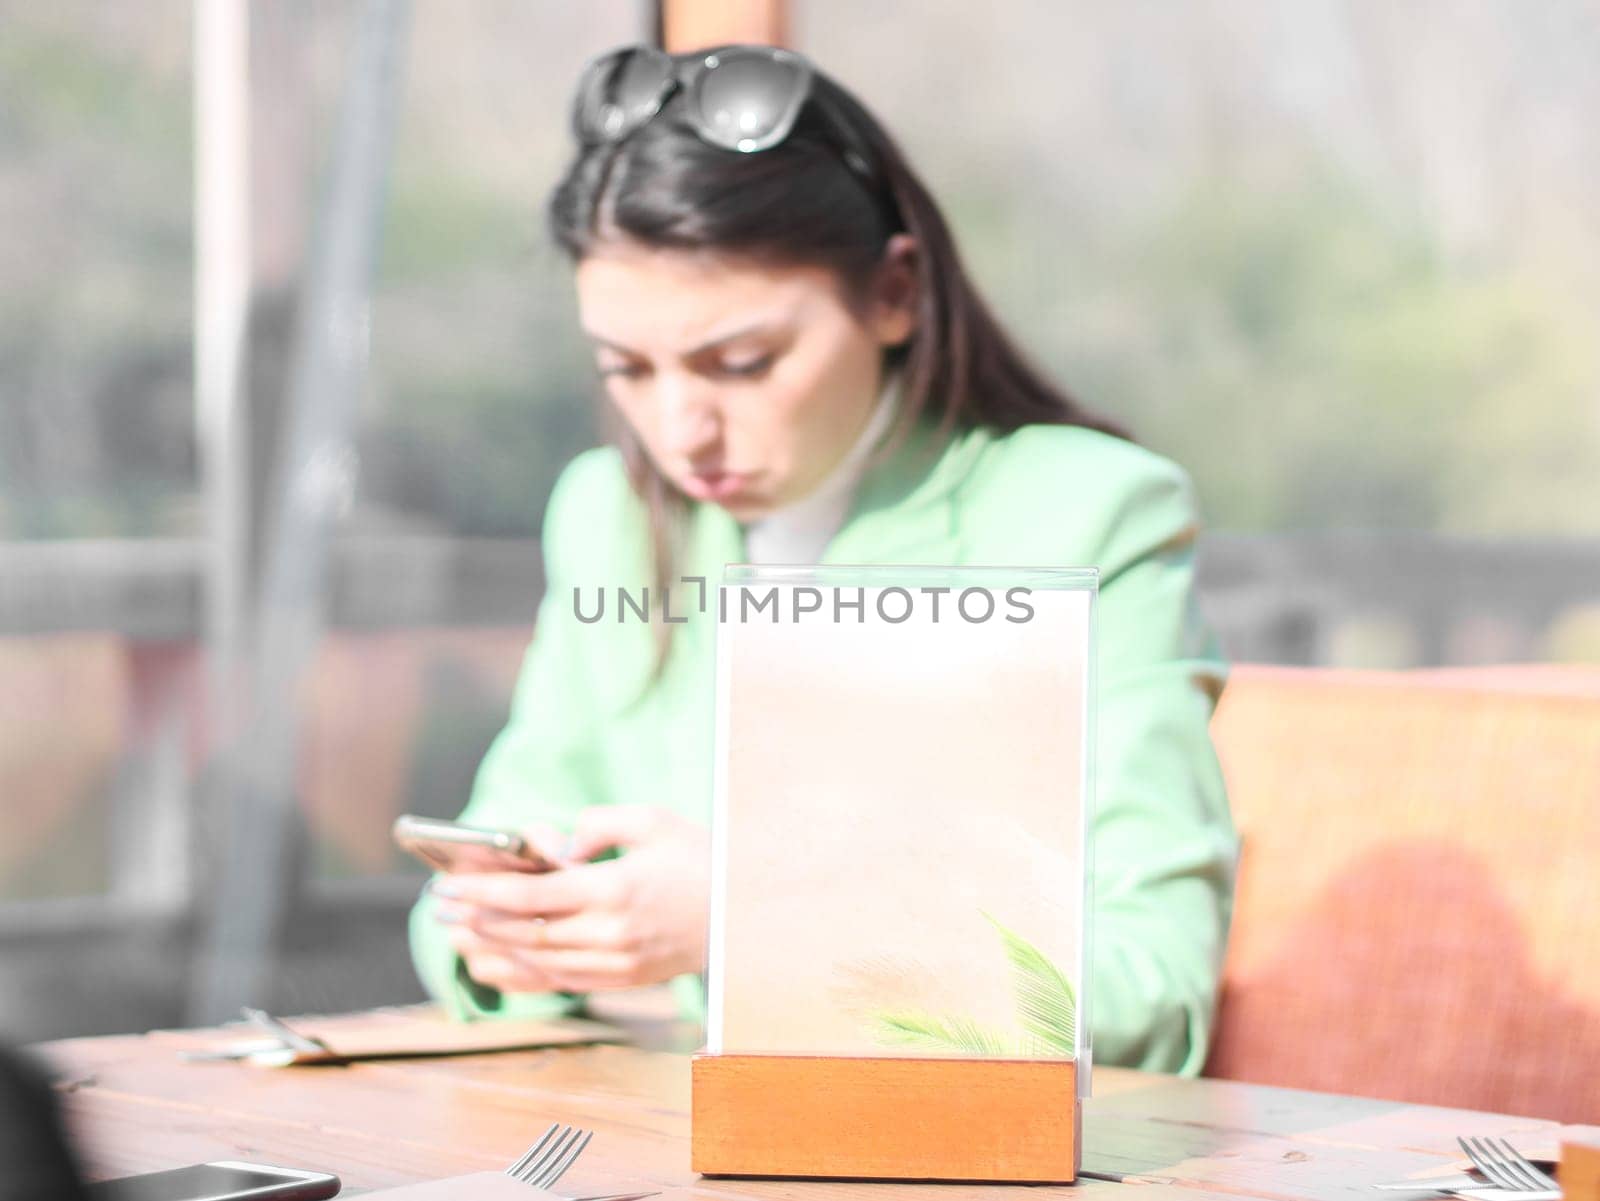 One empty sign for a restaurant menu stands on the table with a blurred sad and disappointed girl with a mobile phone in her hands who is sitting on the terrace of a water cafe on a sunny spring day, side view close-up with depth of field.